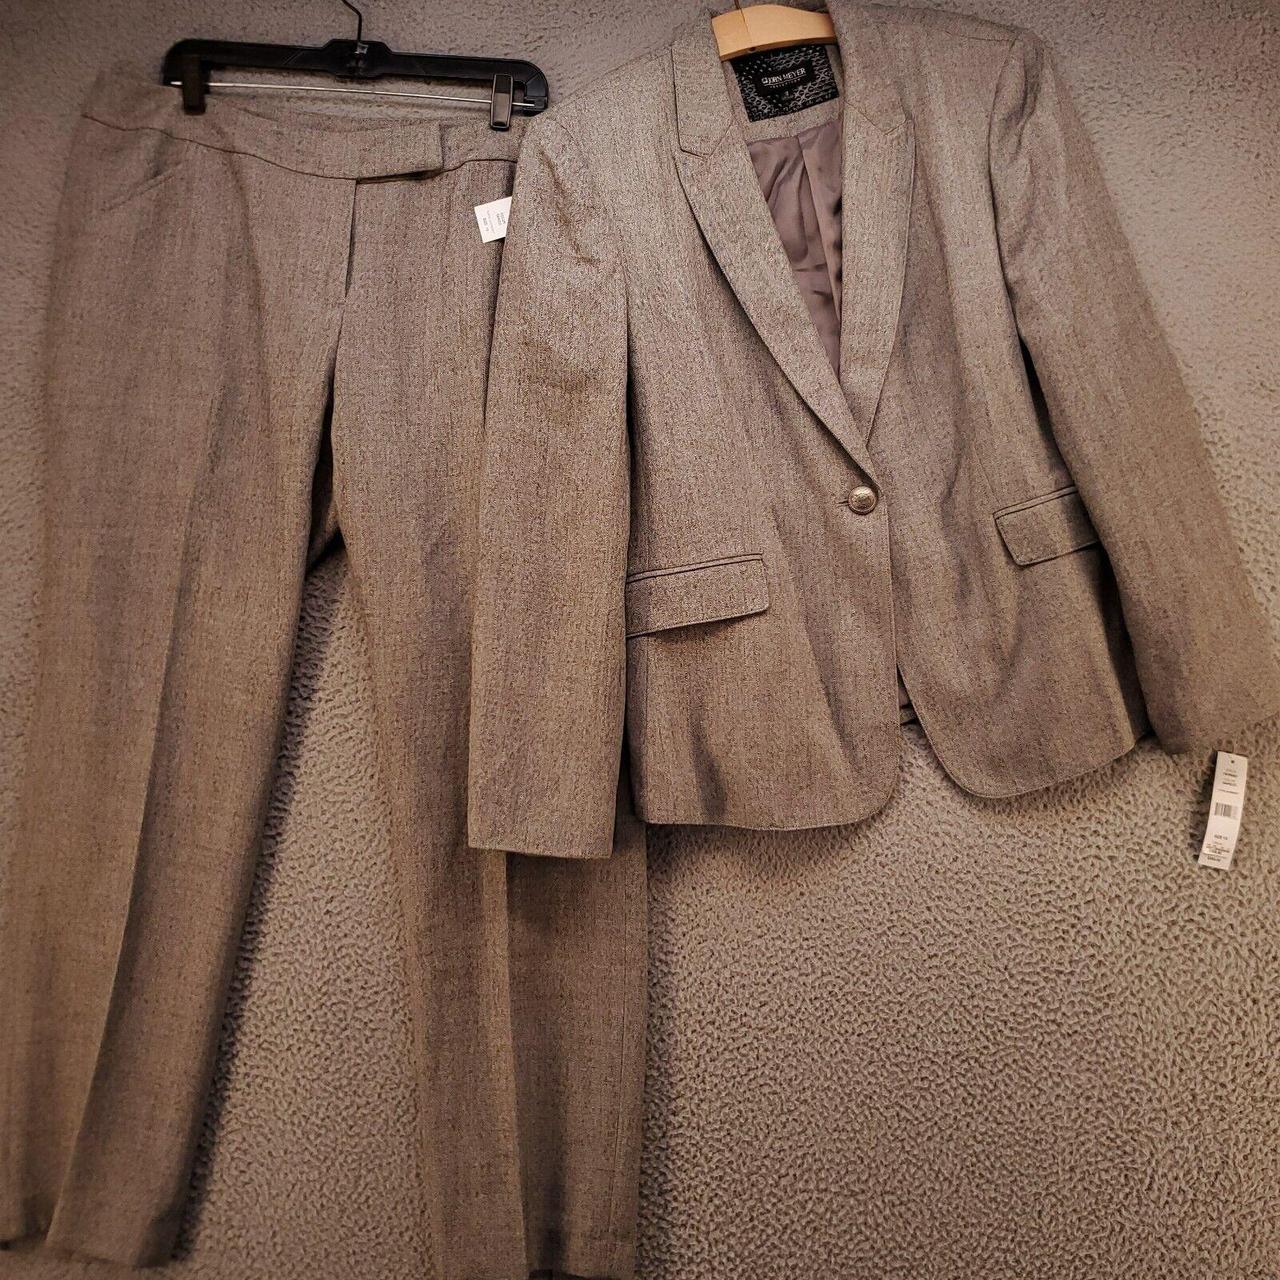 Product Image 1 - New John Meyer Collection Suit